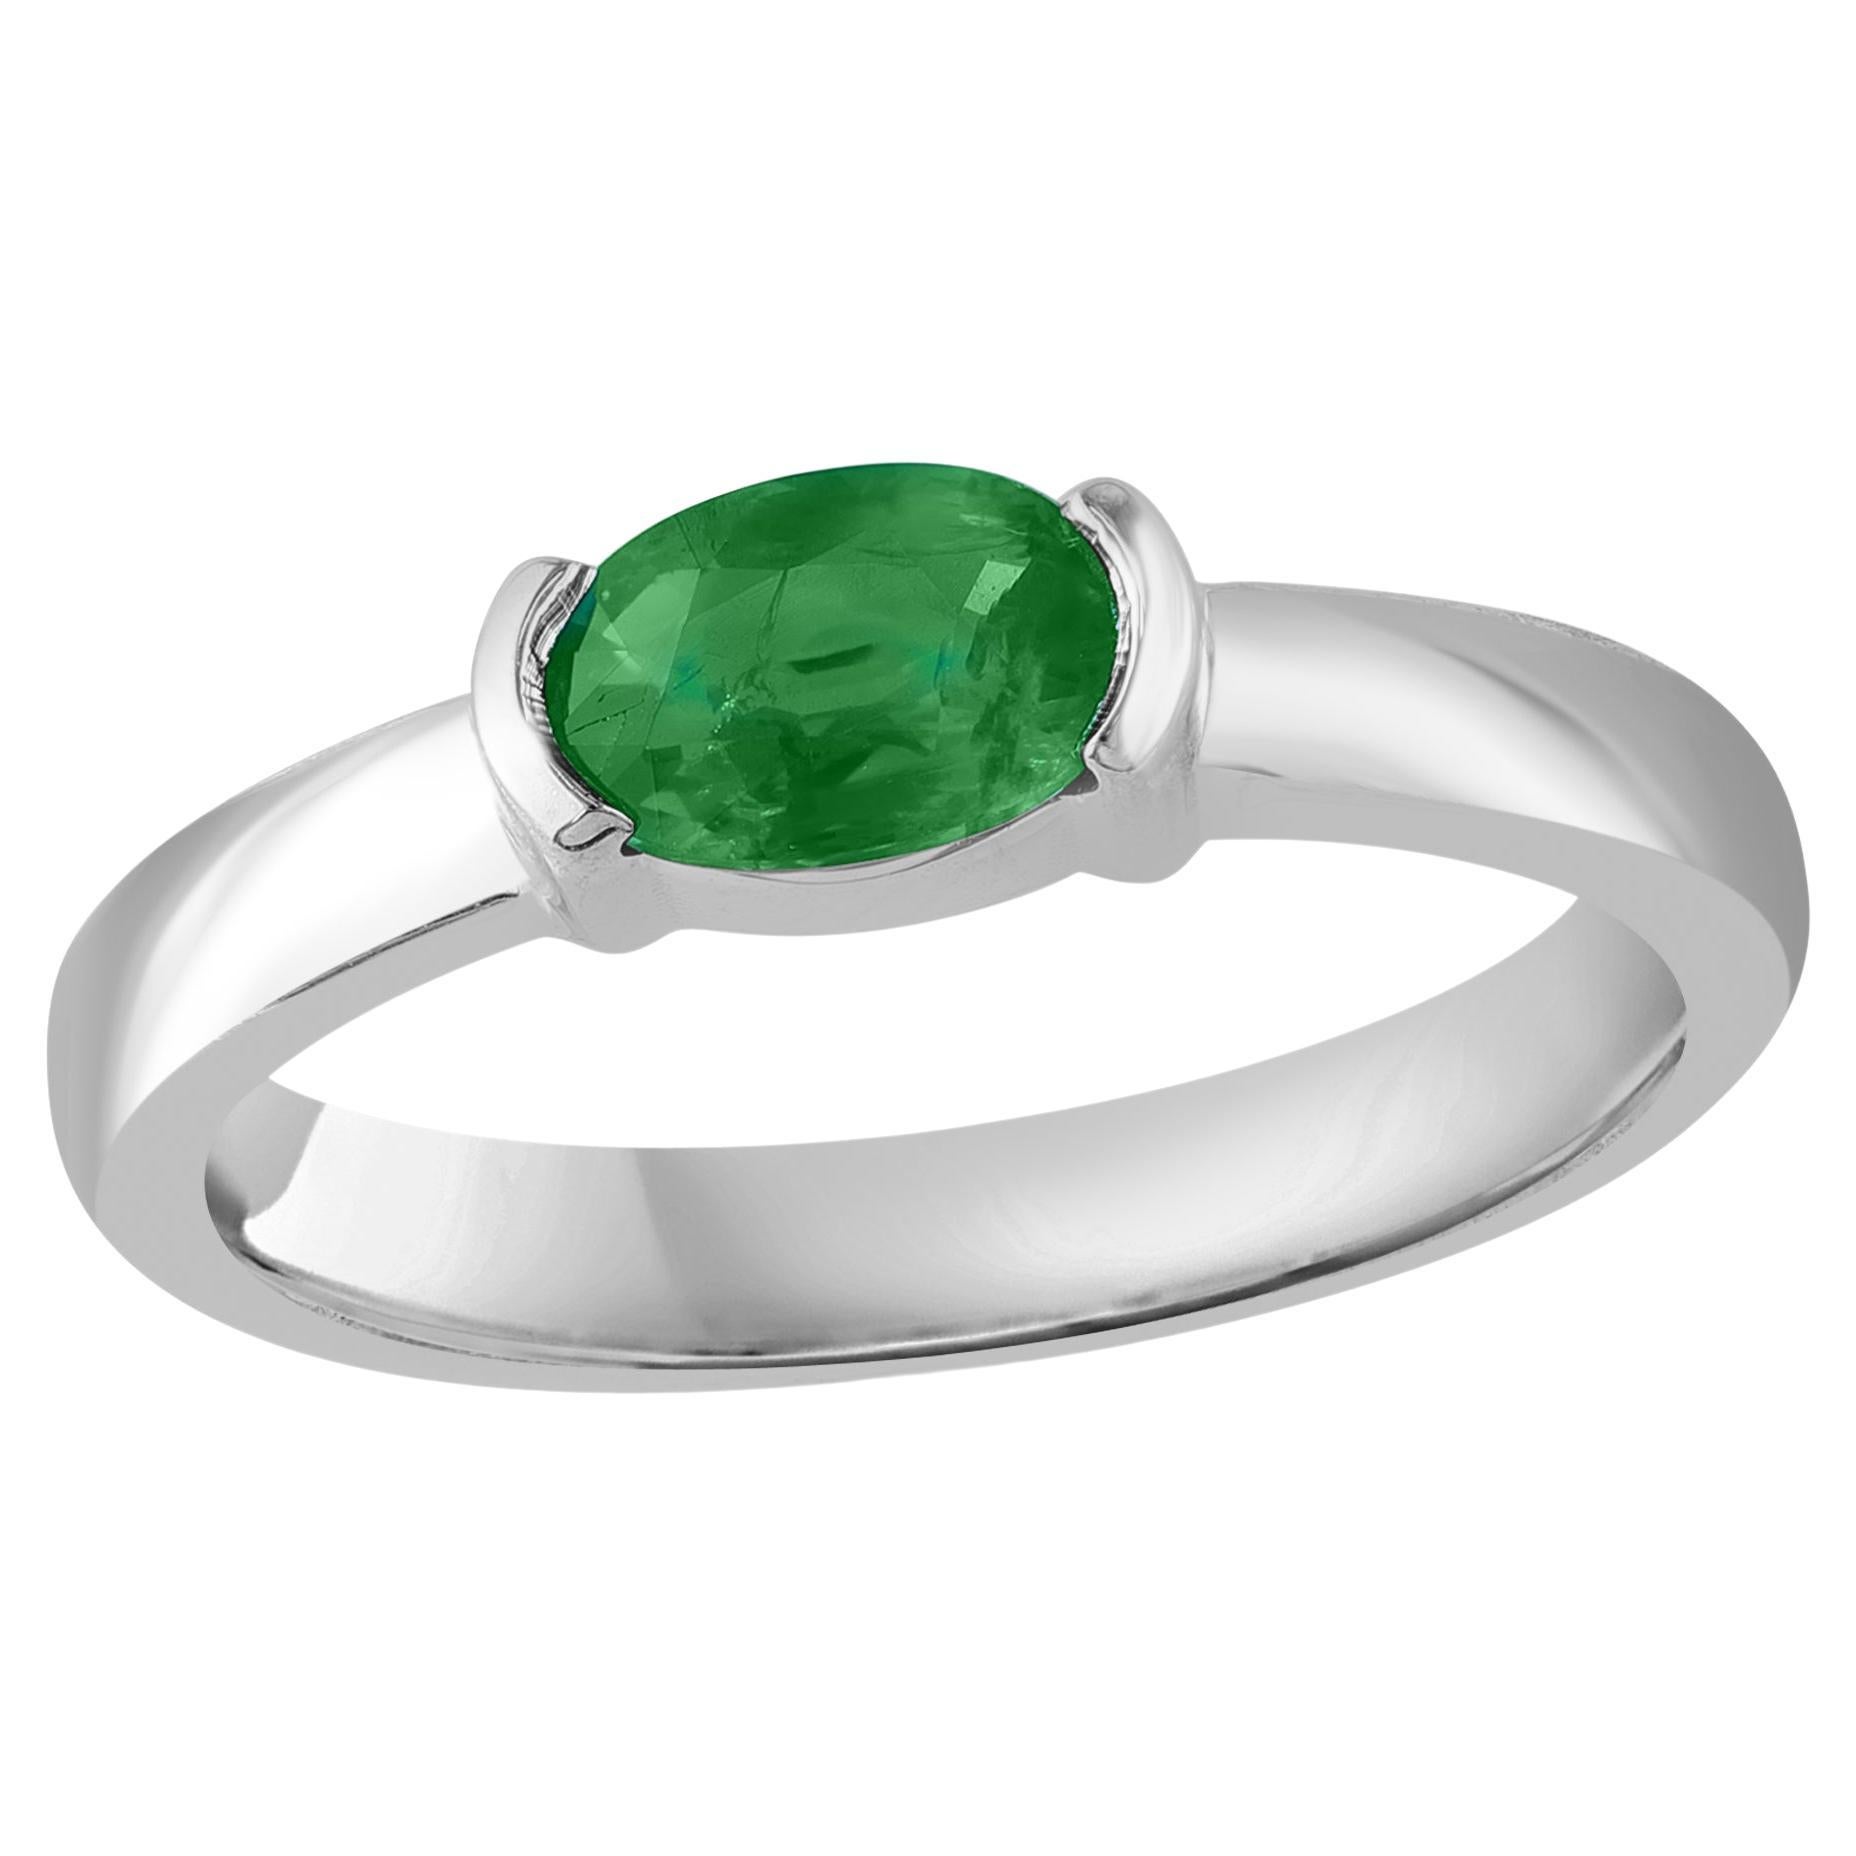 0.77 Carat Oval Cut Emerald Band Ring in 14K White Gold